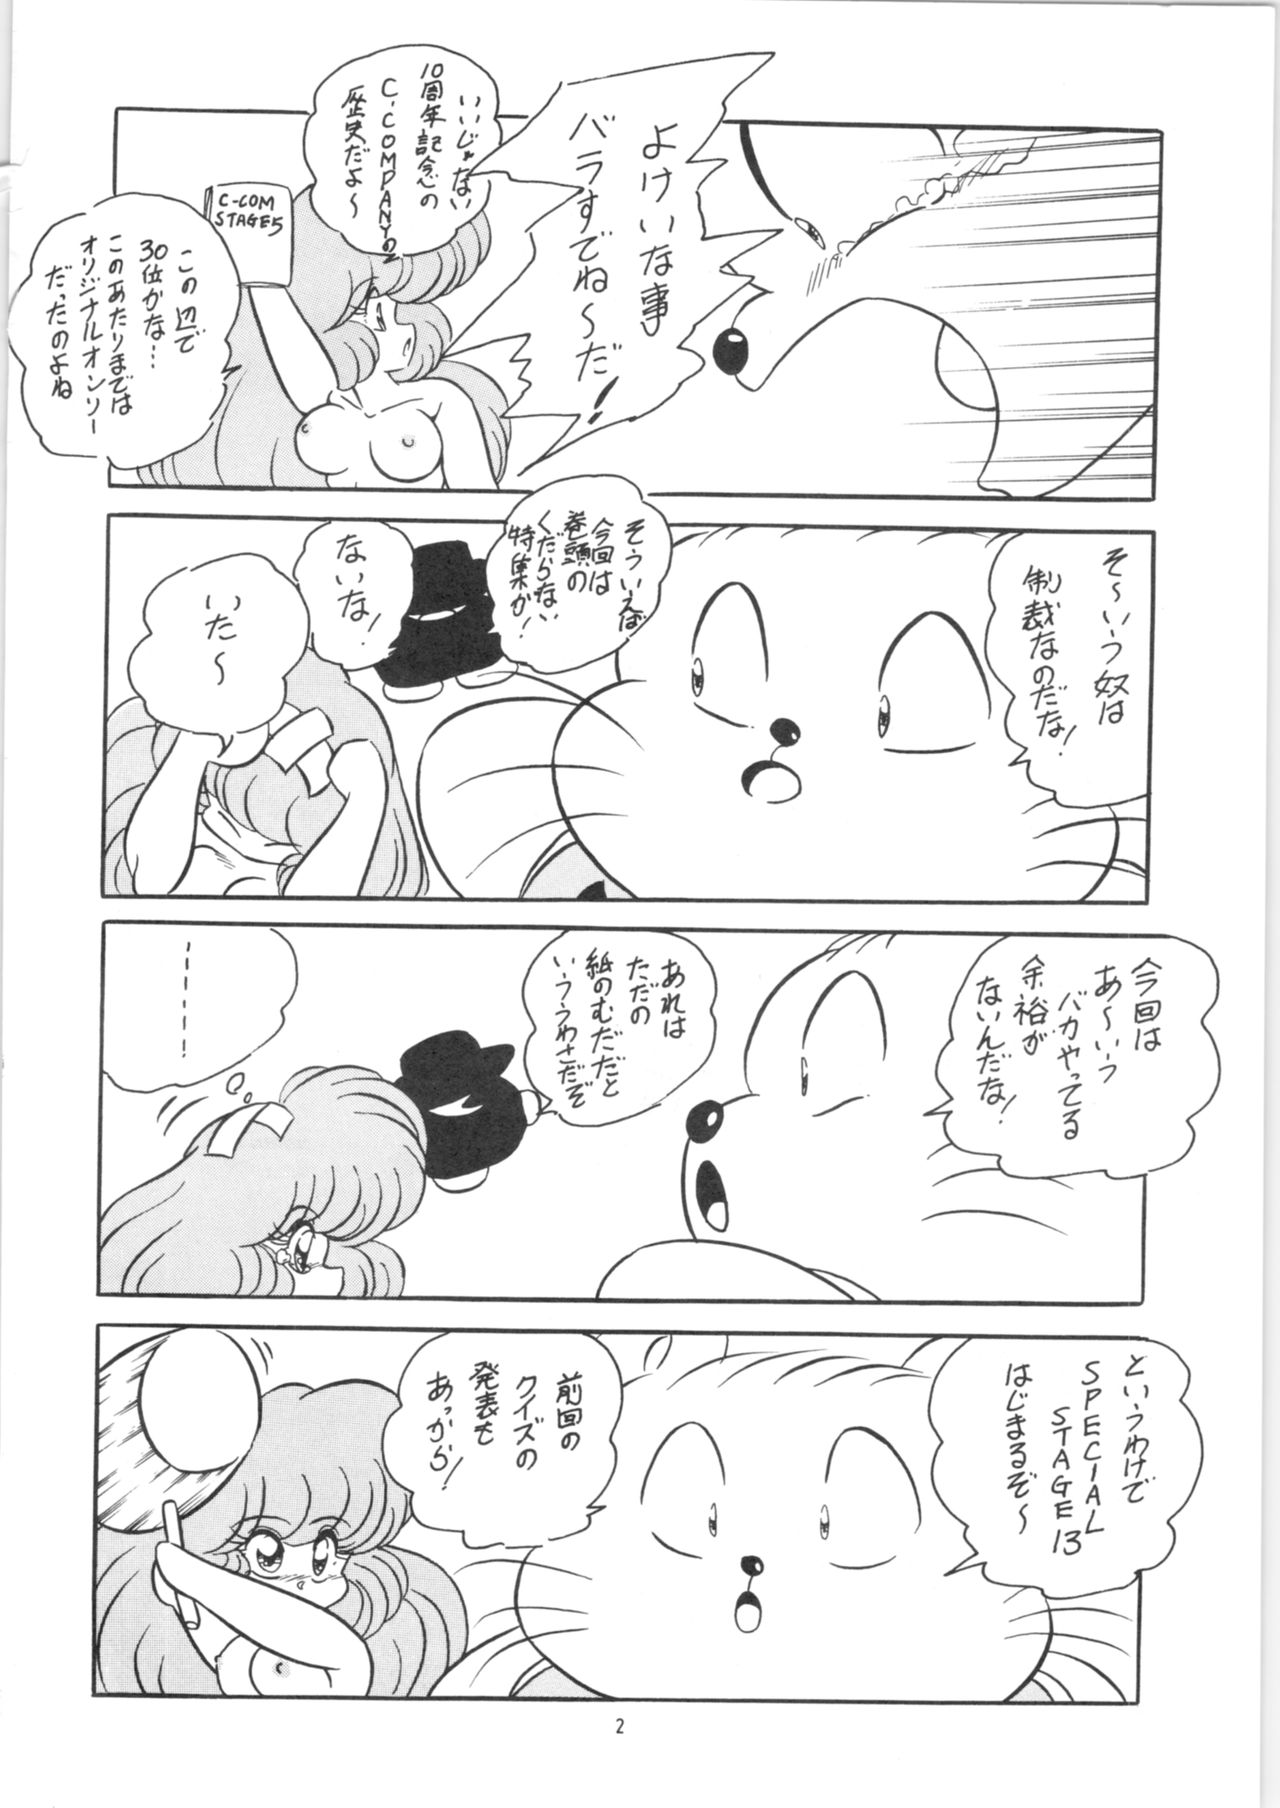 [C-COMPANY] C-COMPANY SPECIAL STAGE 13 (Ranma 1/2) page 3 full